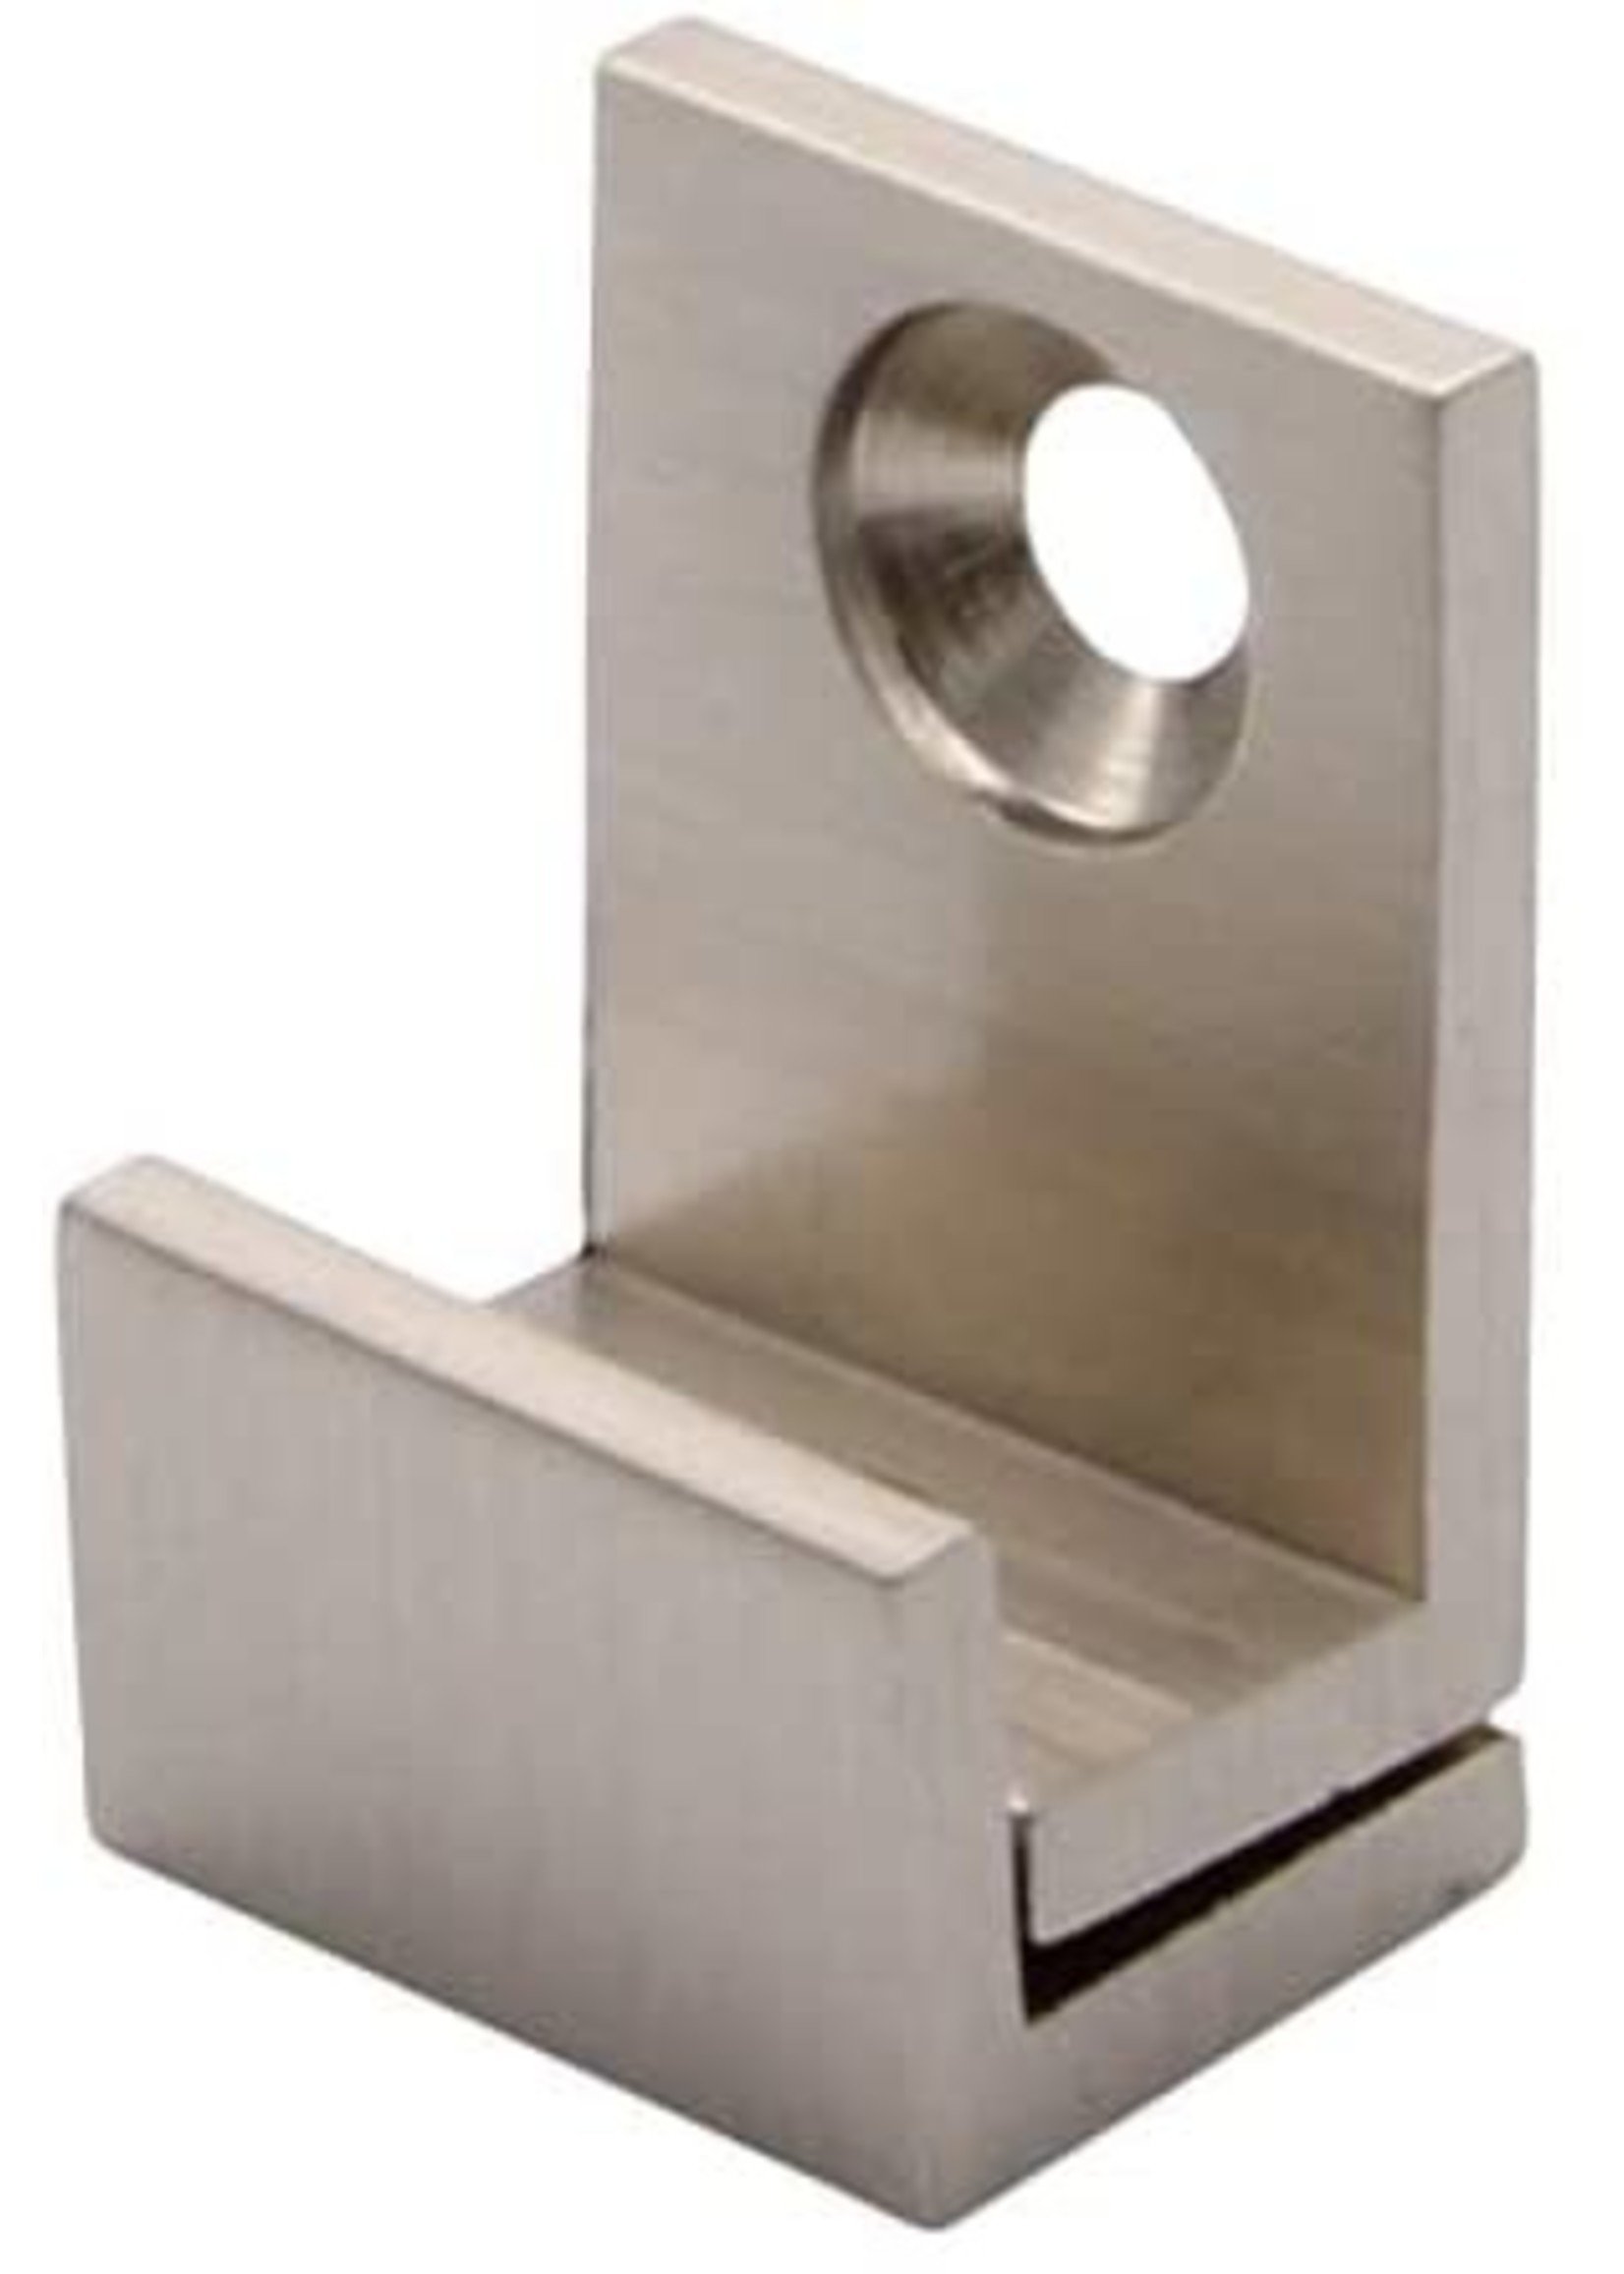 METAL CLIP FOR MOUNTING (LBRS1707-MC )